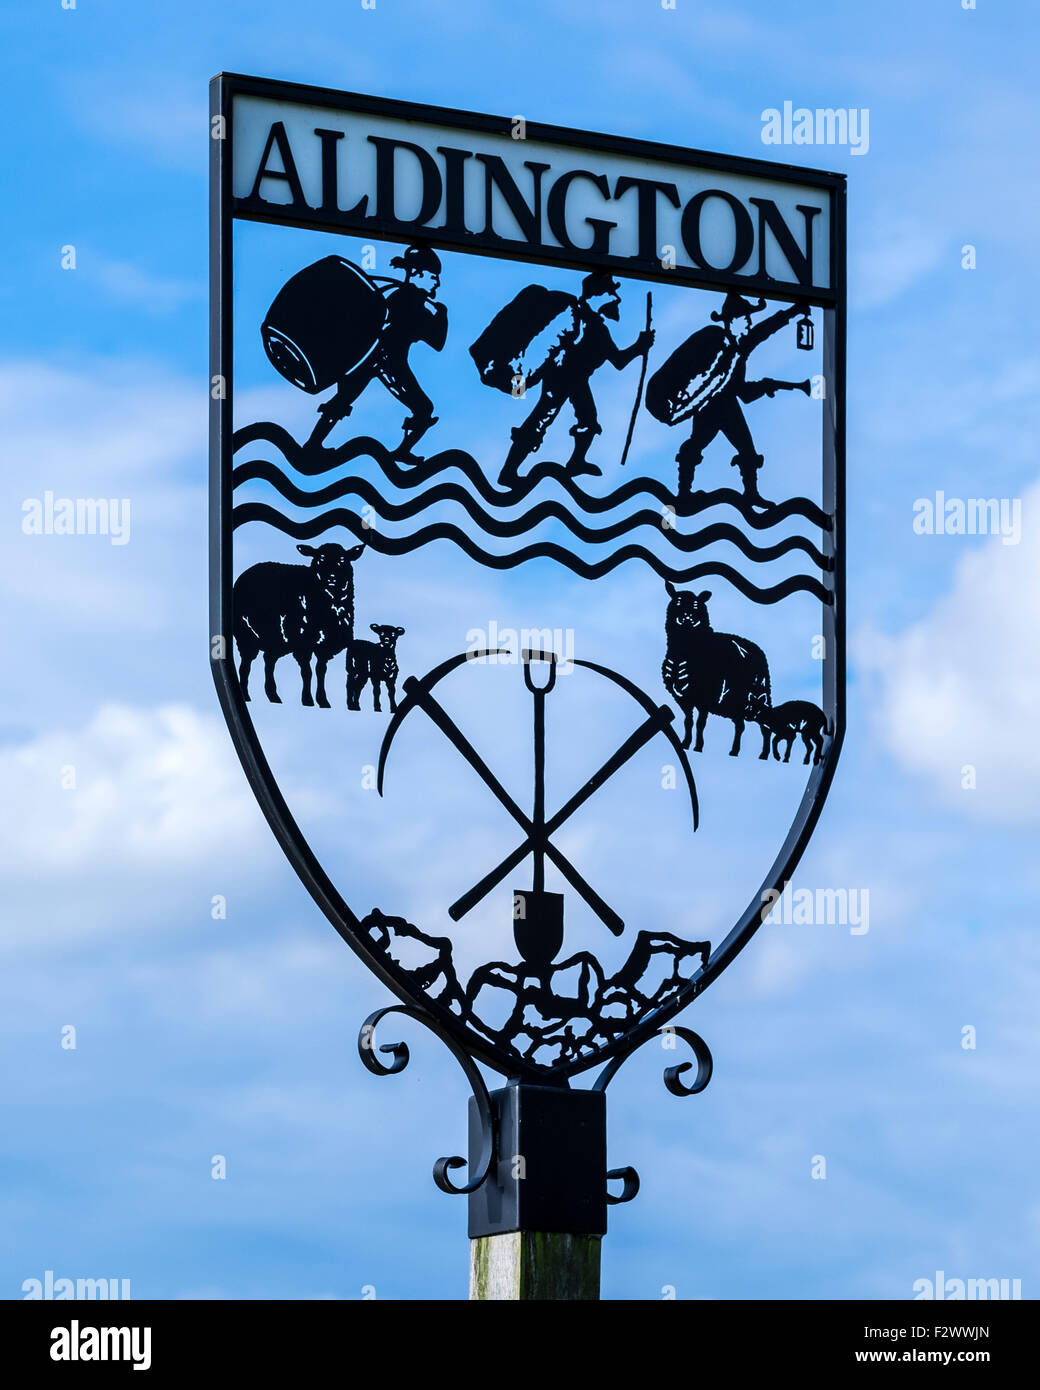 Aldington Village Sign, Kent. such signs are common in the county of Kent in England. Stock Photo